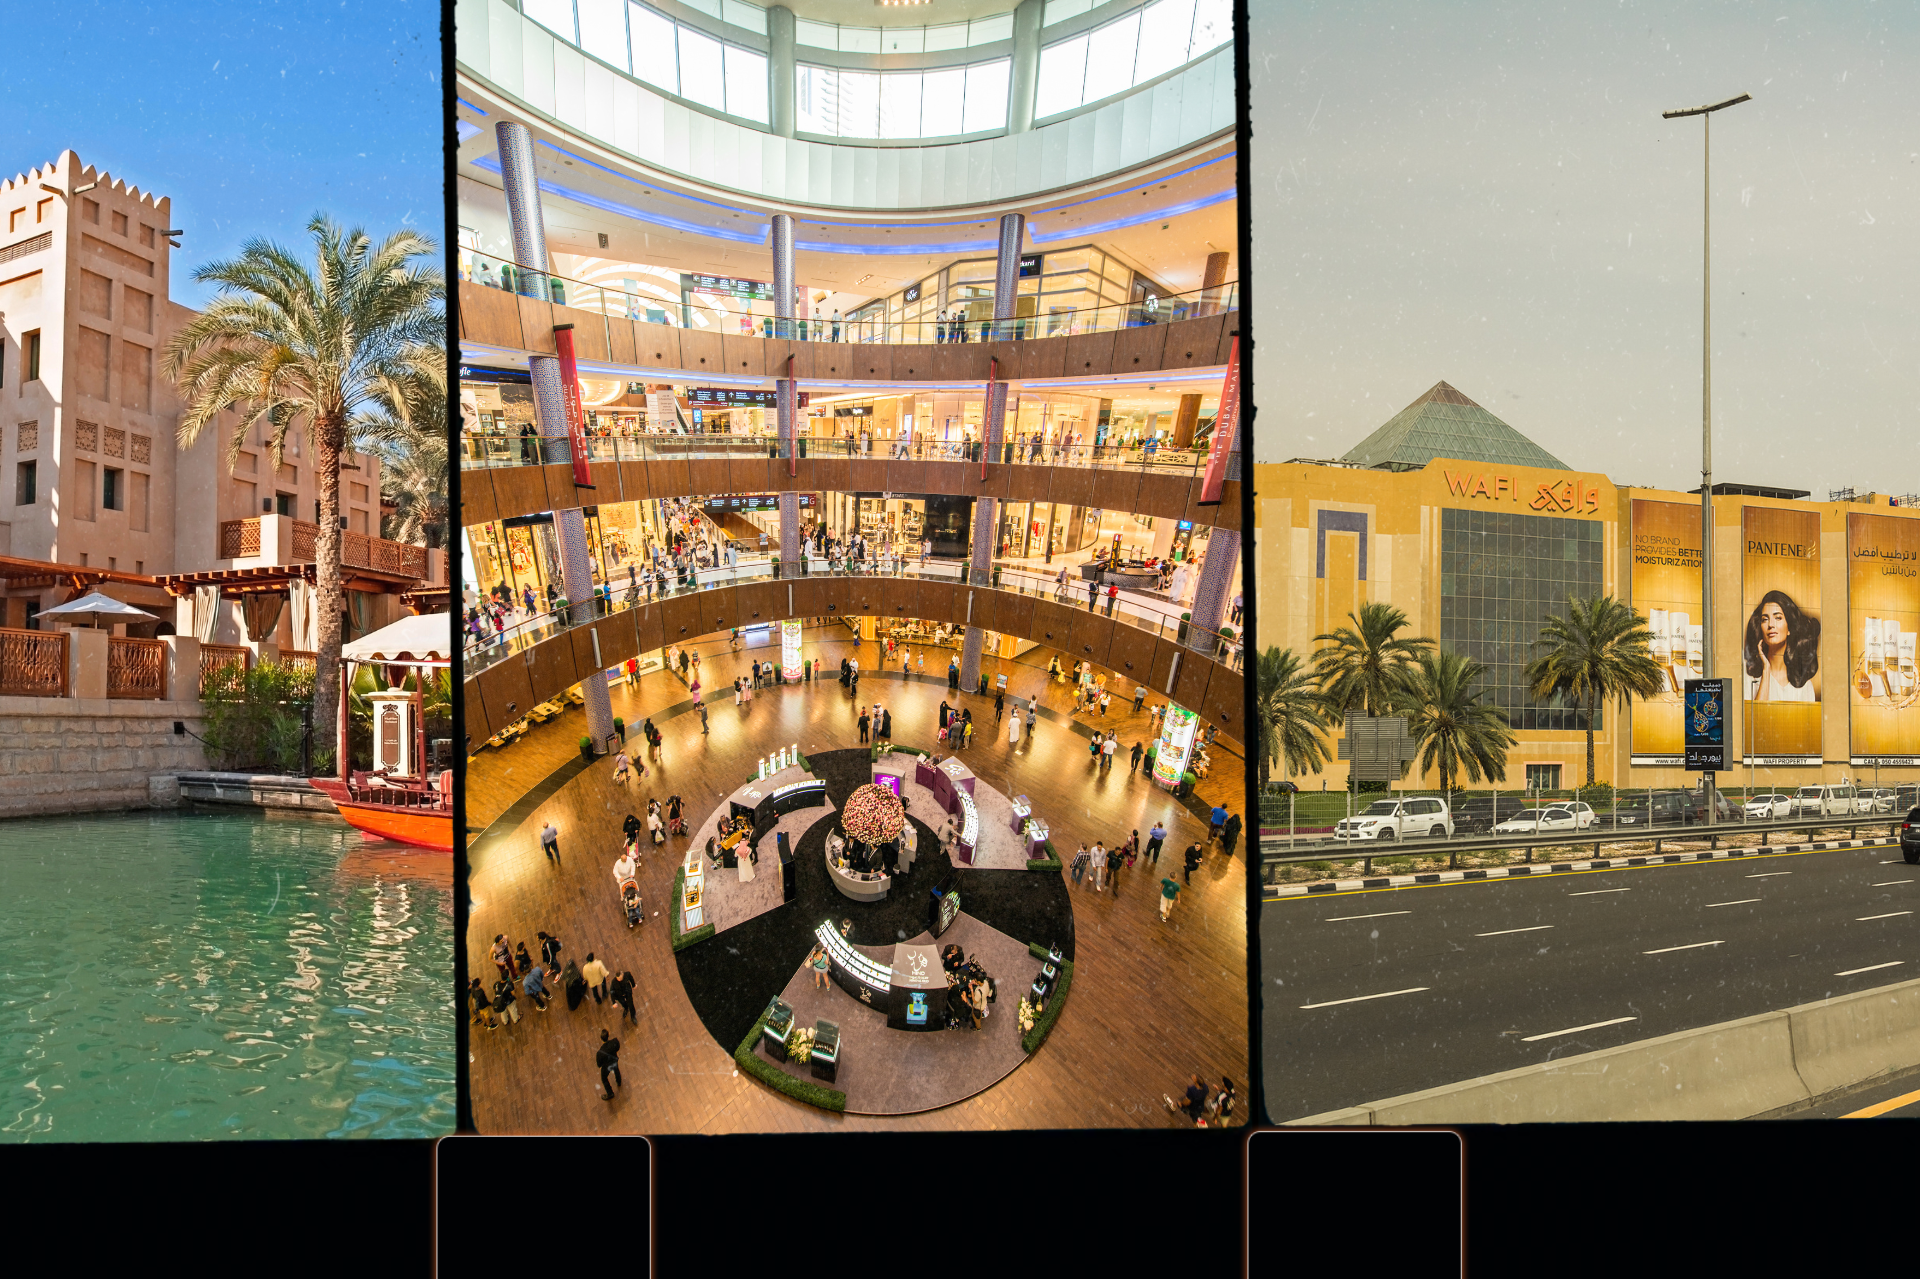 Dubai Shopping: Malls, outlets, and so many souks